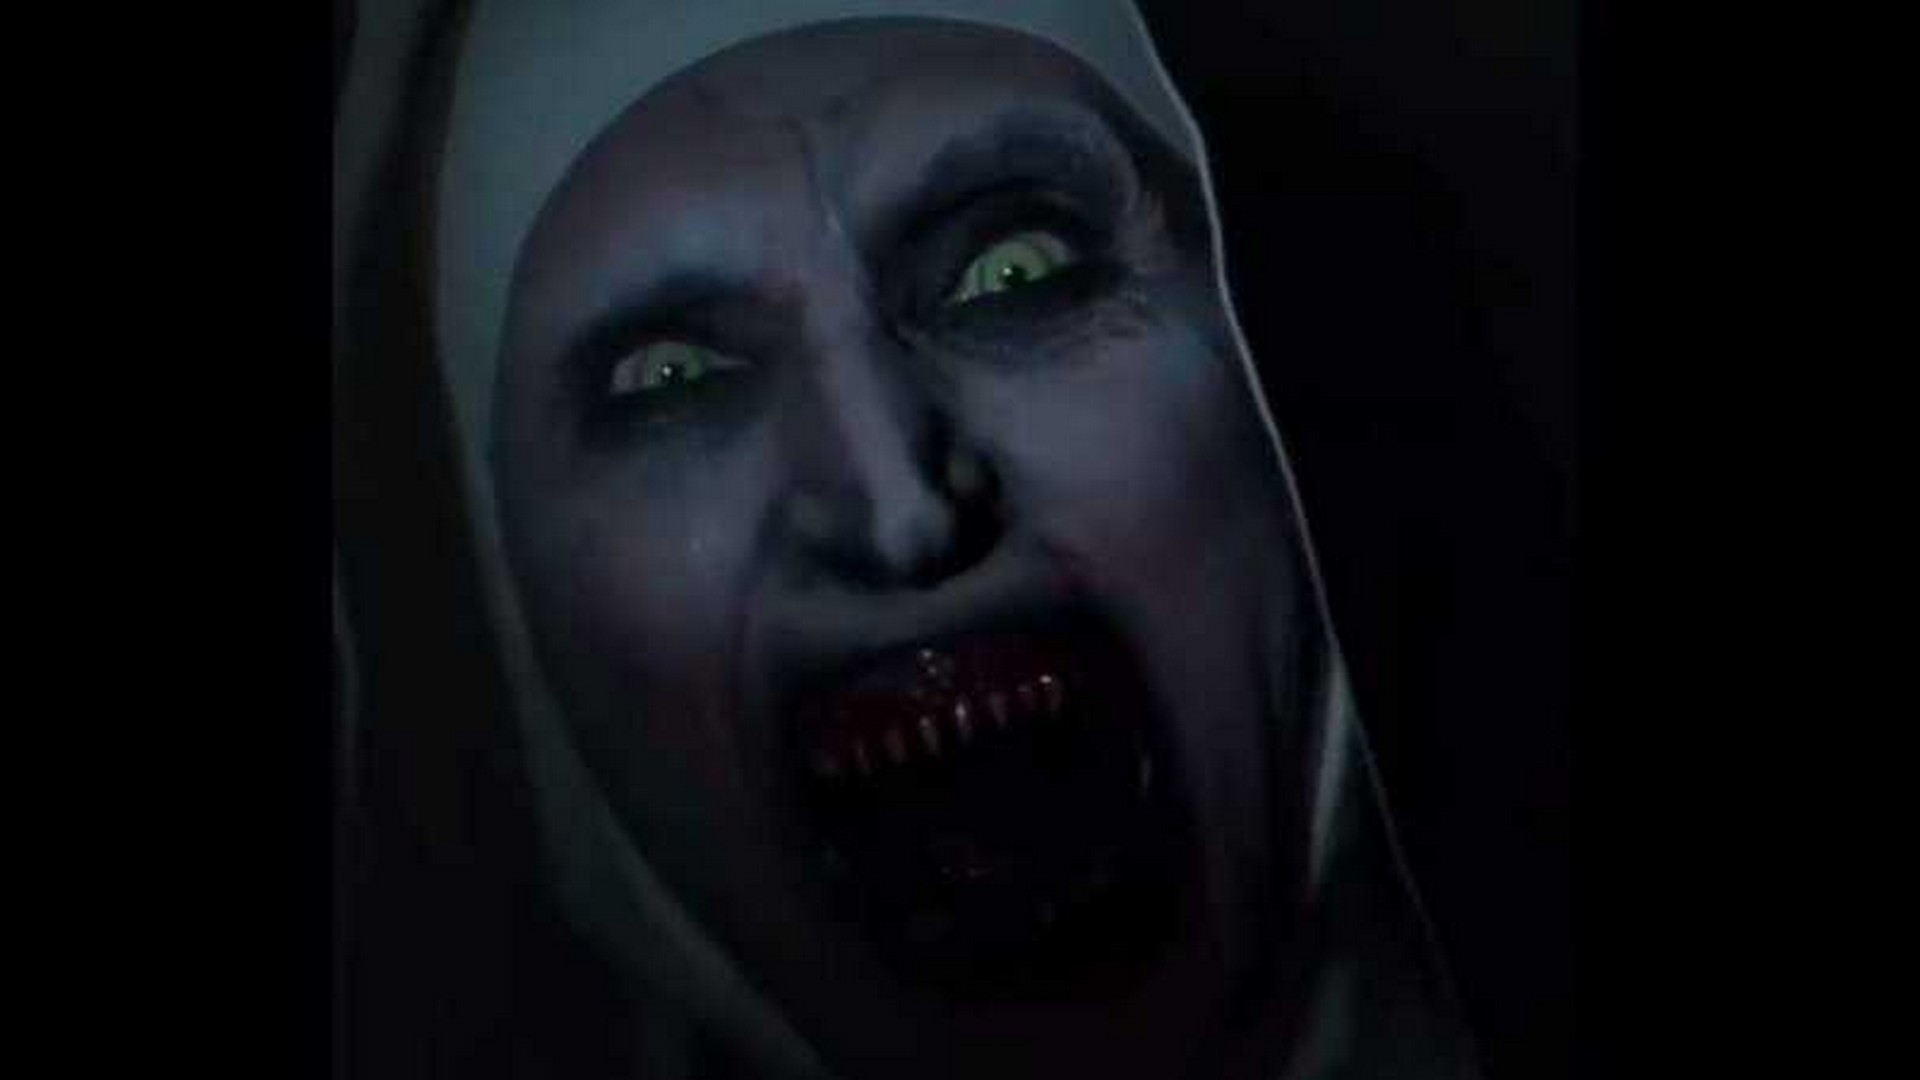 The Nun Valak Wallpaper HD With Resolution 1920X1080 pixel. You can make this wallpaper for your Desktop Computer Backgrounds, Mac Wallpapers, Android Lock screen or iPhone Screensavers